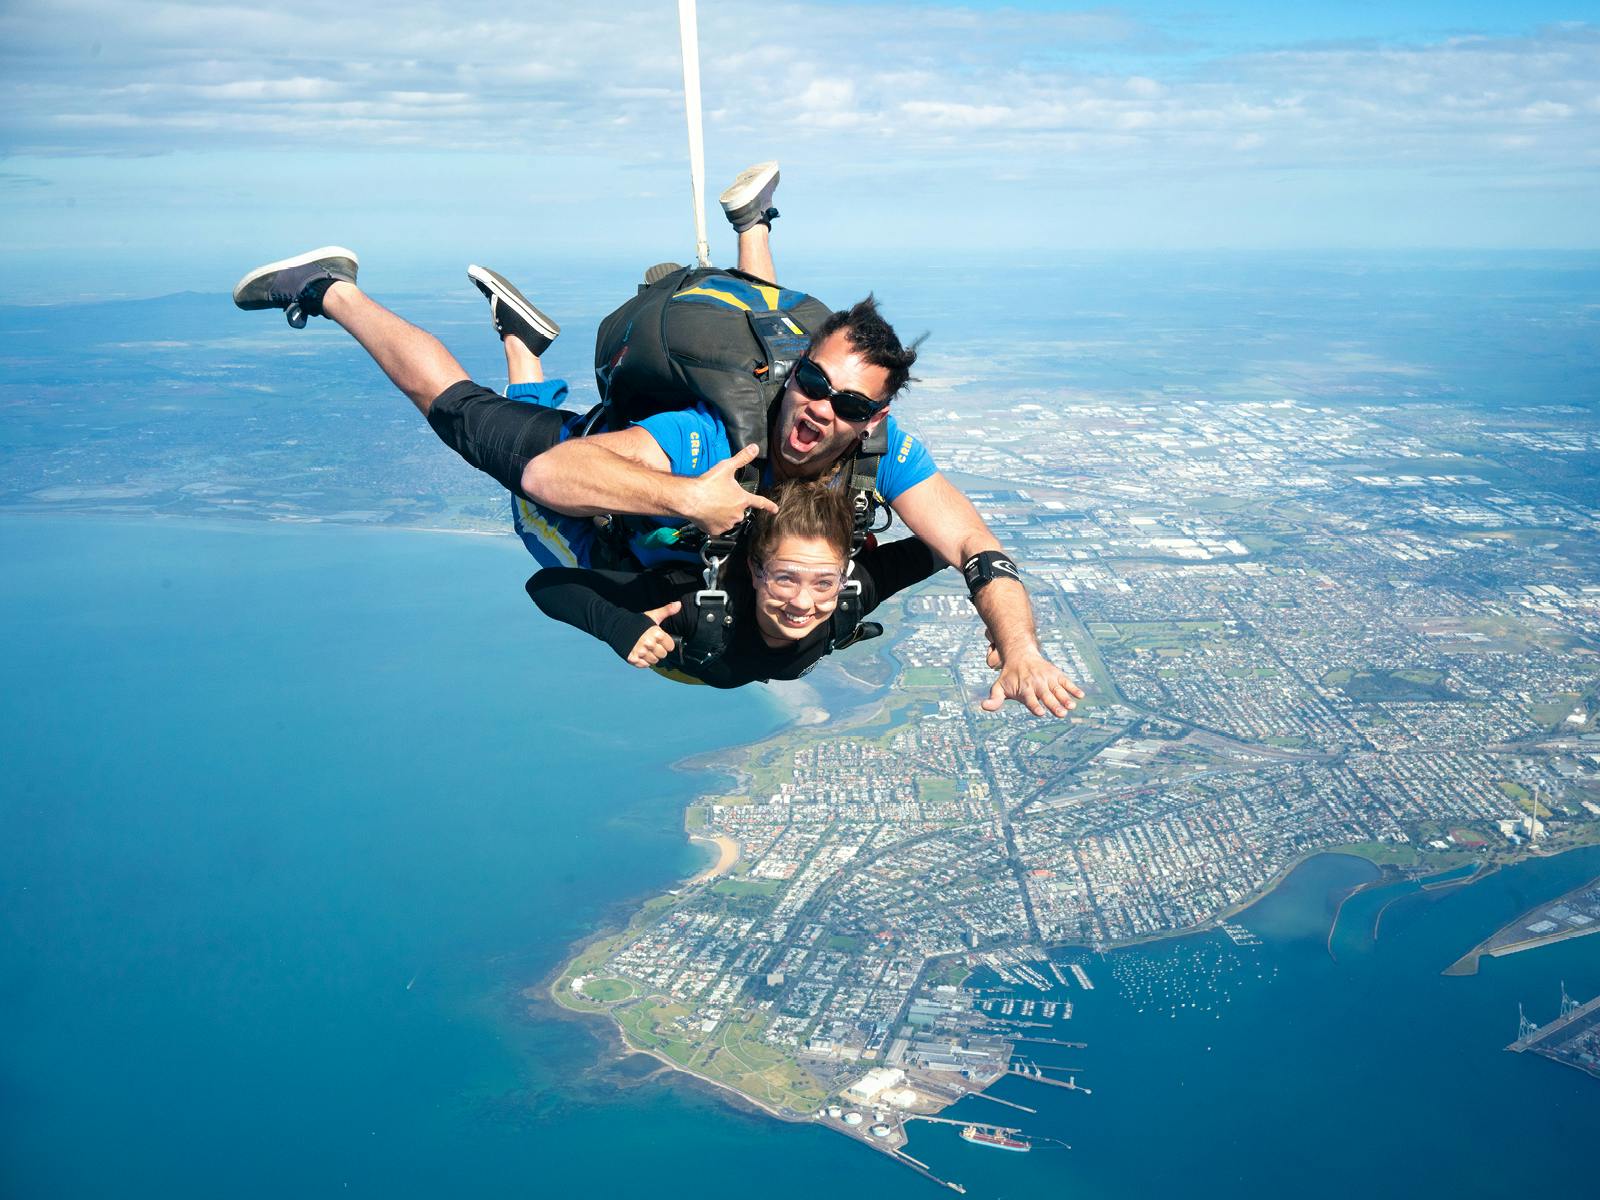 Skydiving experience over Melbourne St Kilda